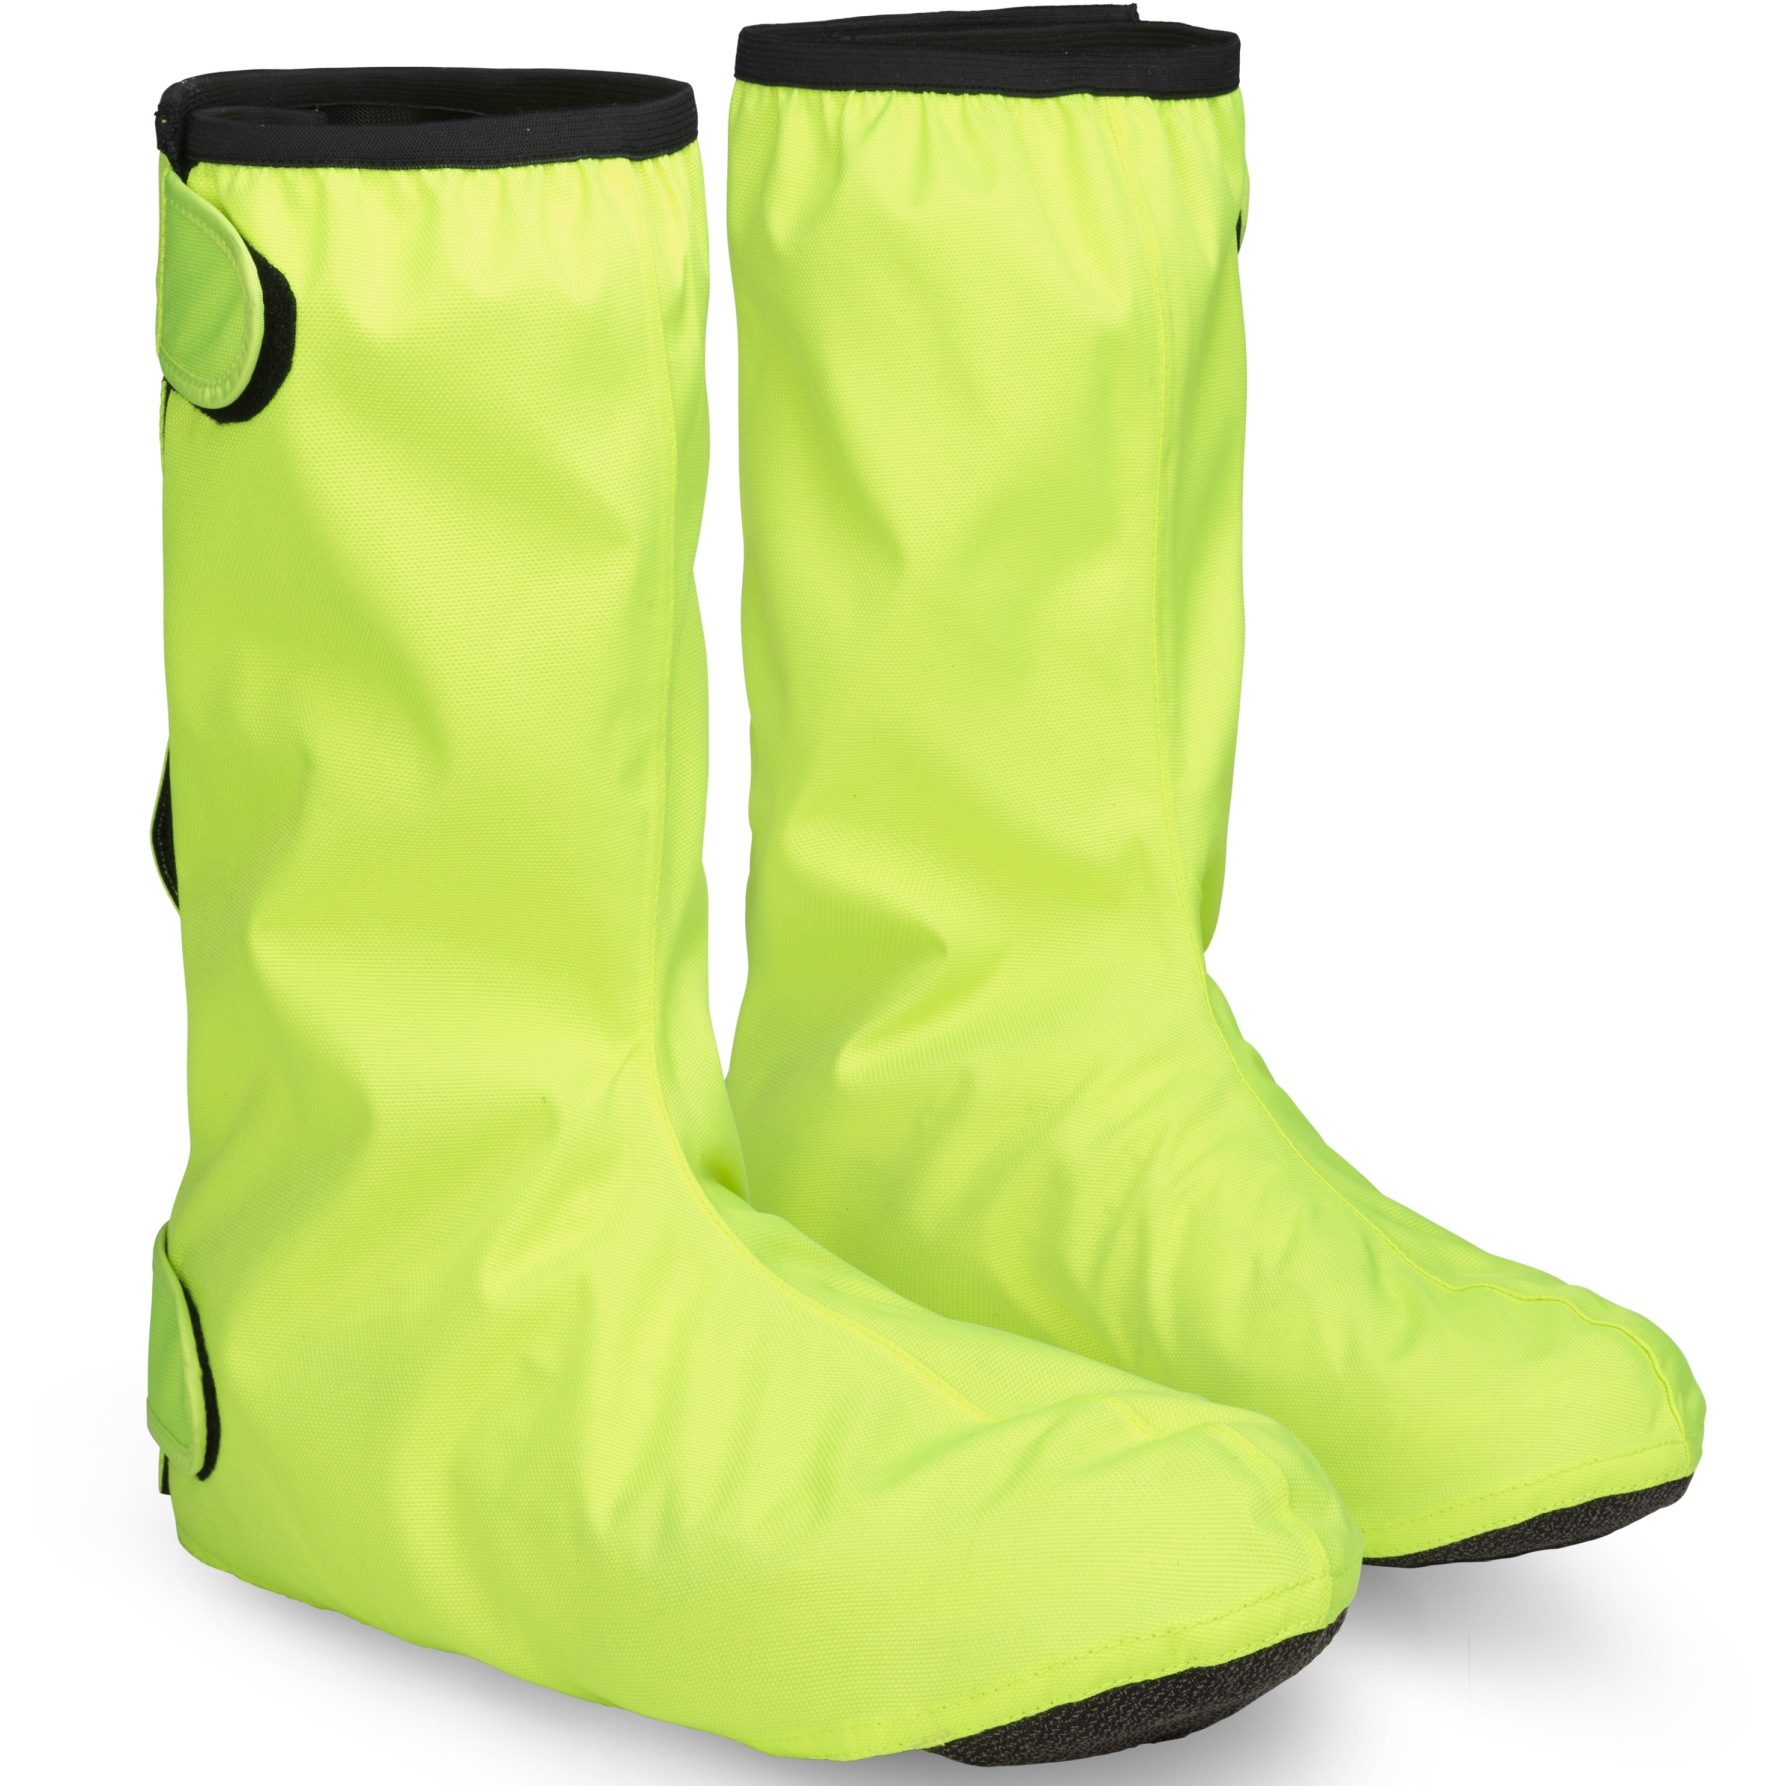 Picture of GripGrab DryFoot Waterproof Everyday Shoe Covers 2 - Yellow Hi-Vis